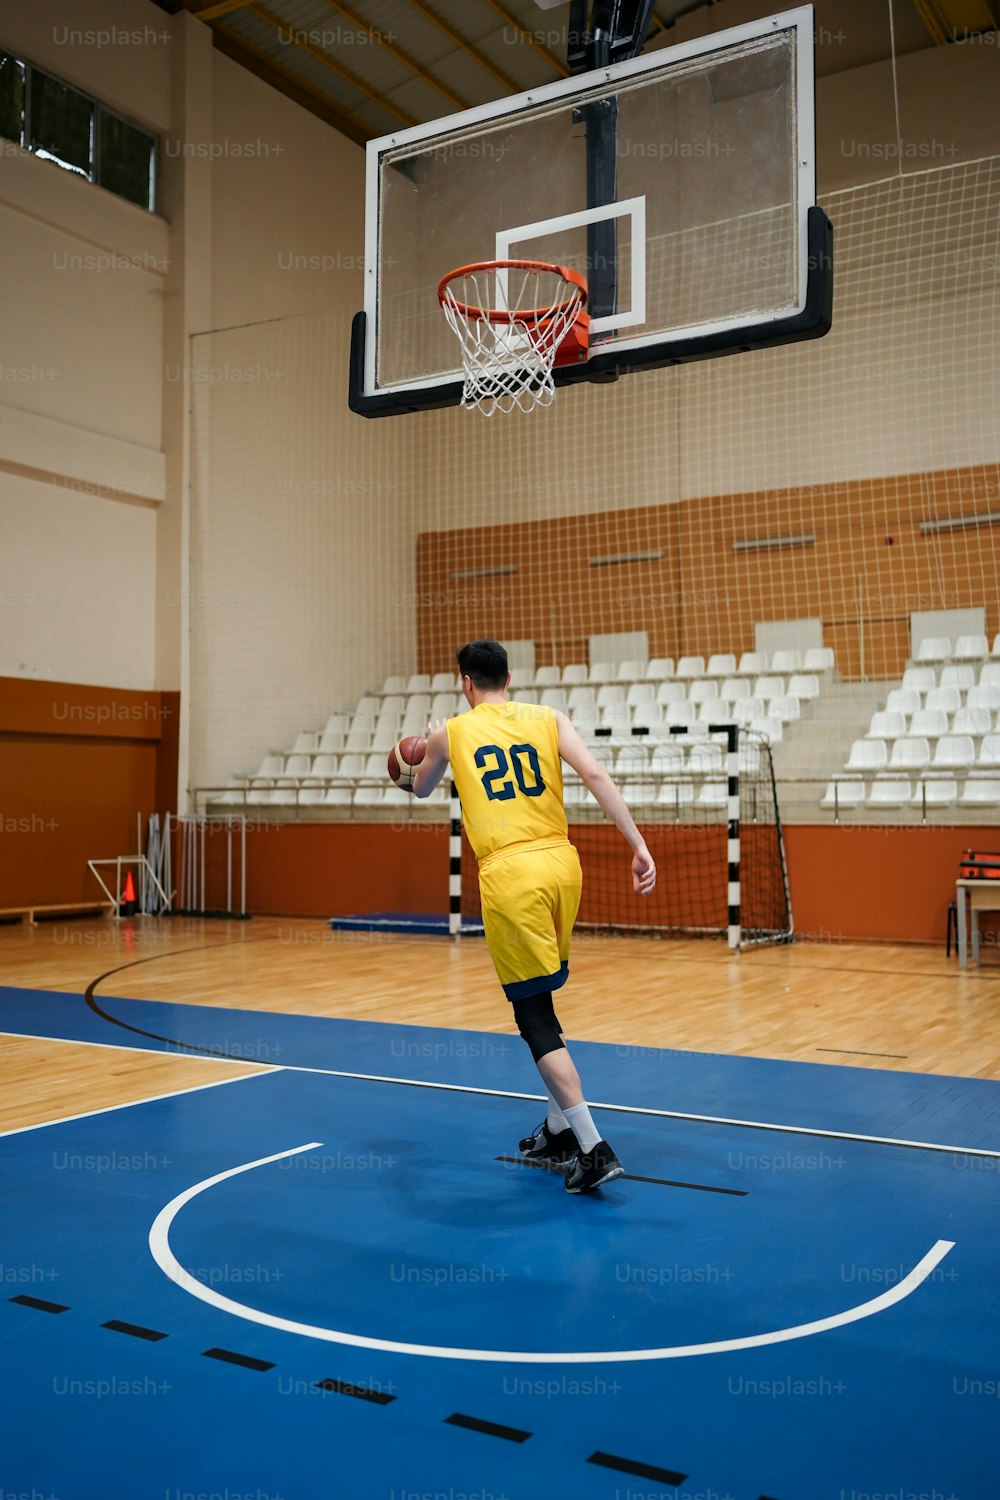 a man in a yellow jersey is playing basketball